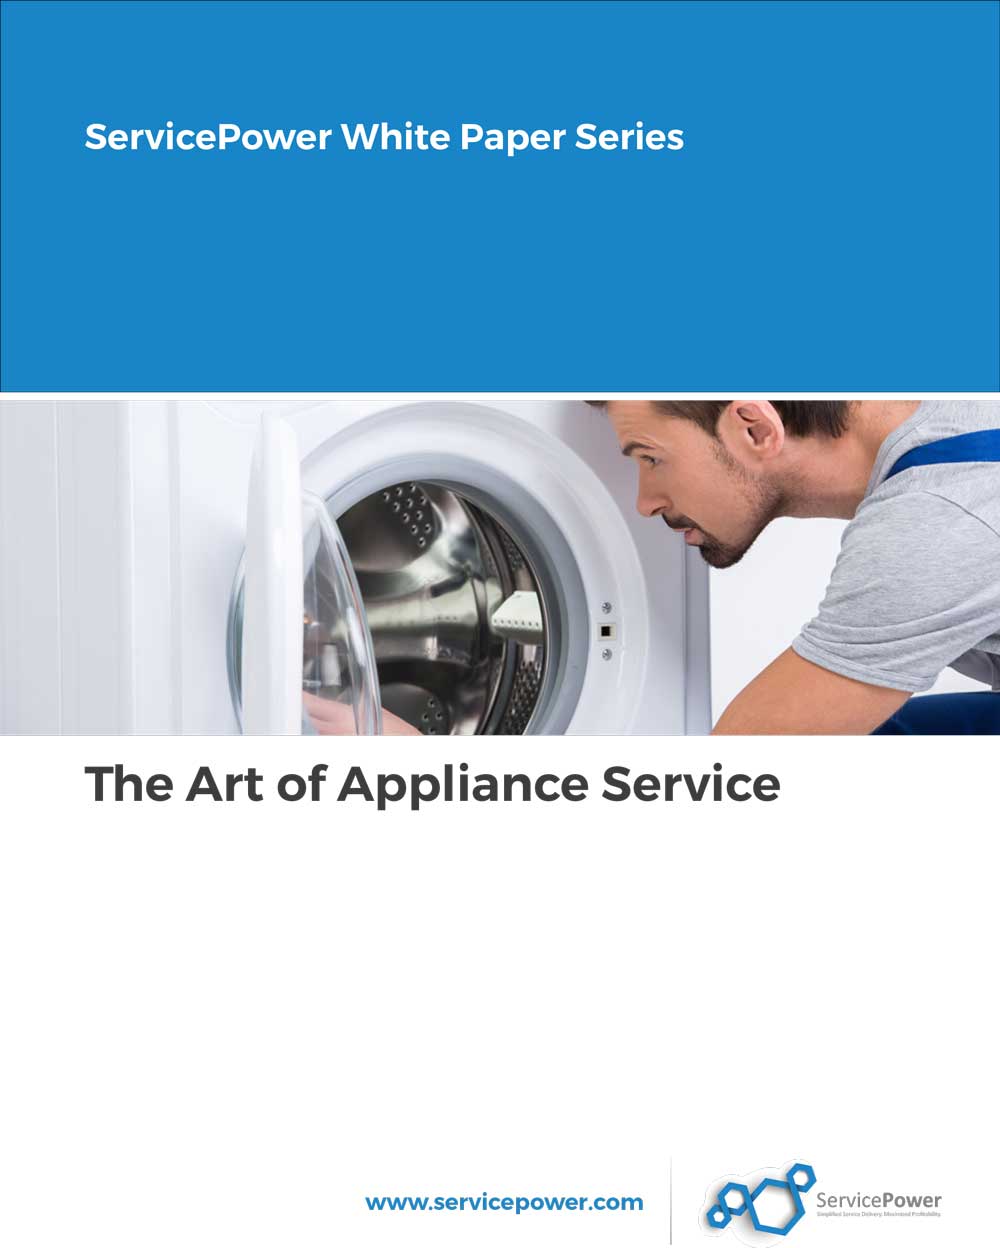 Download: The Art of Appliance Service